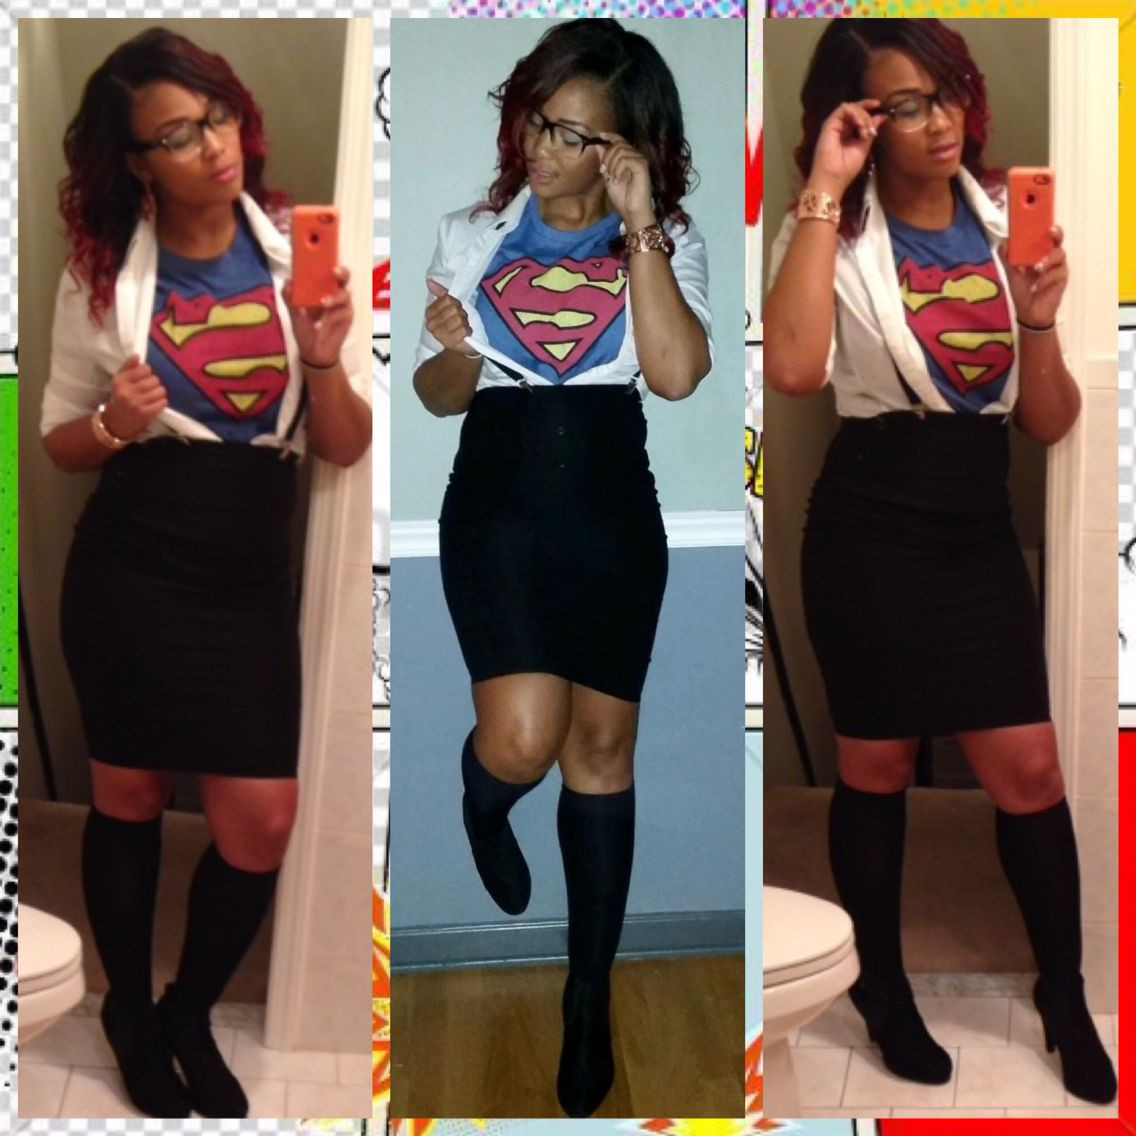 DIY Supergirl Costumes
 My Superwoman DIY costume inspired by Pinterest